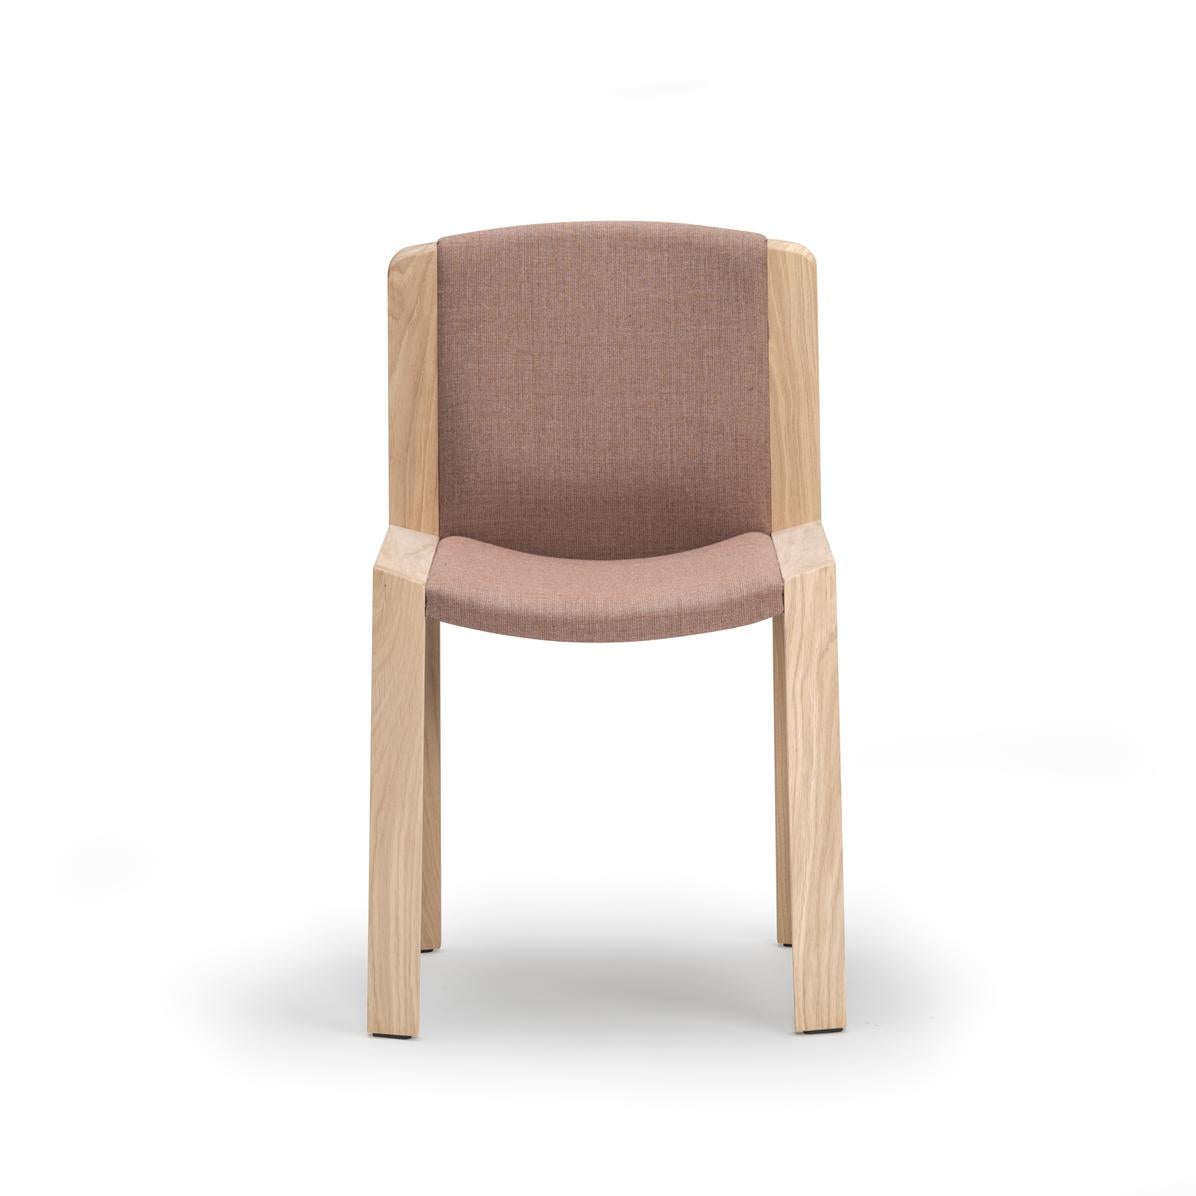 Set of Six Joe Colombo 'Chair 300' Wood and Sørensen Leather by Karakter For Sale 11